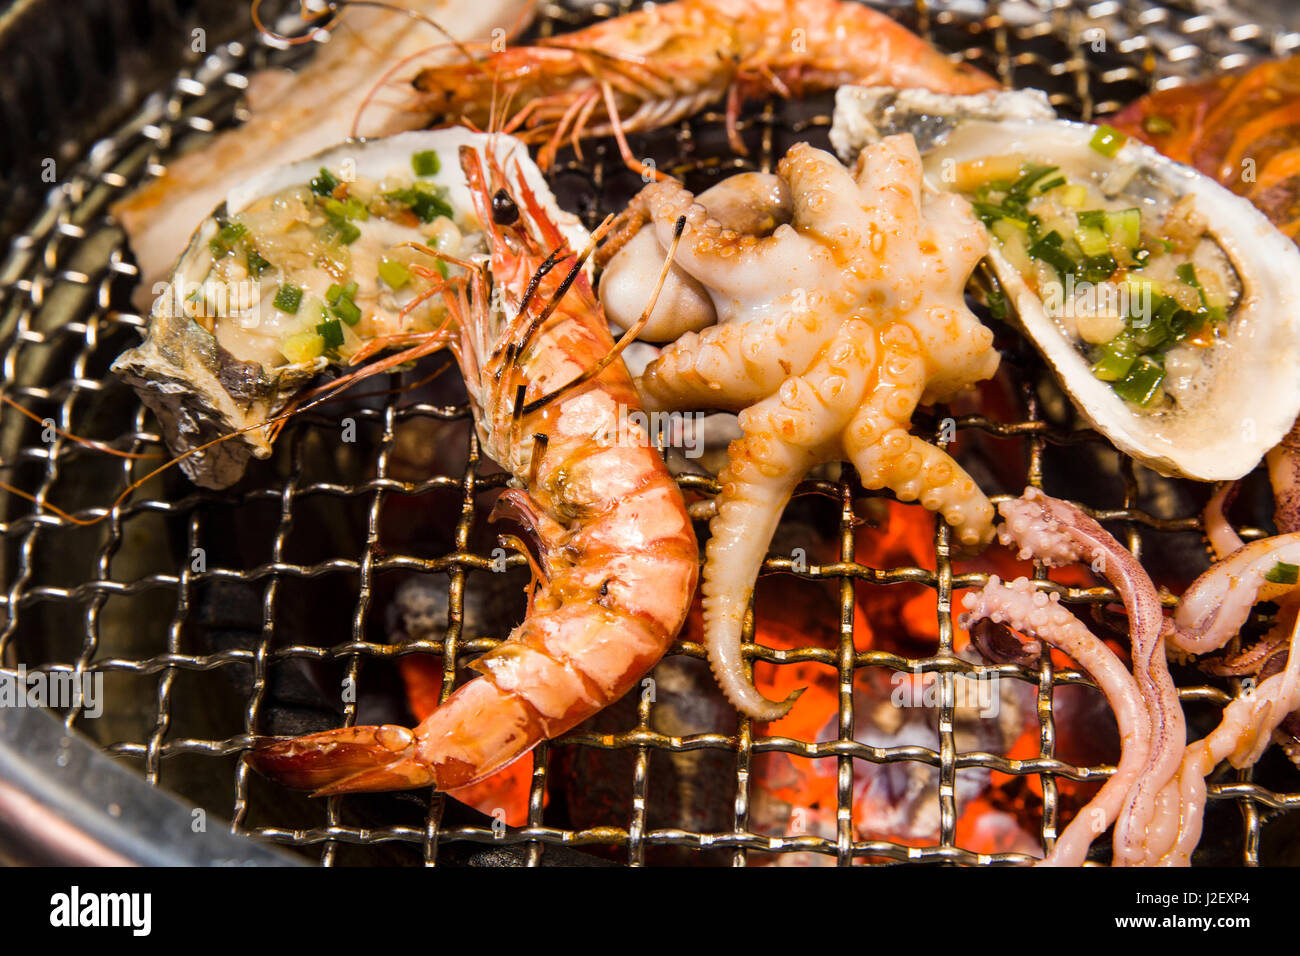 Grilling seafood of shrimp, octopus and oysters on hot charcoal Stock Photo